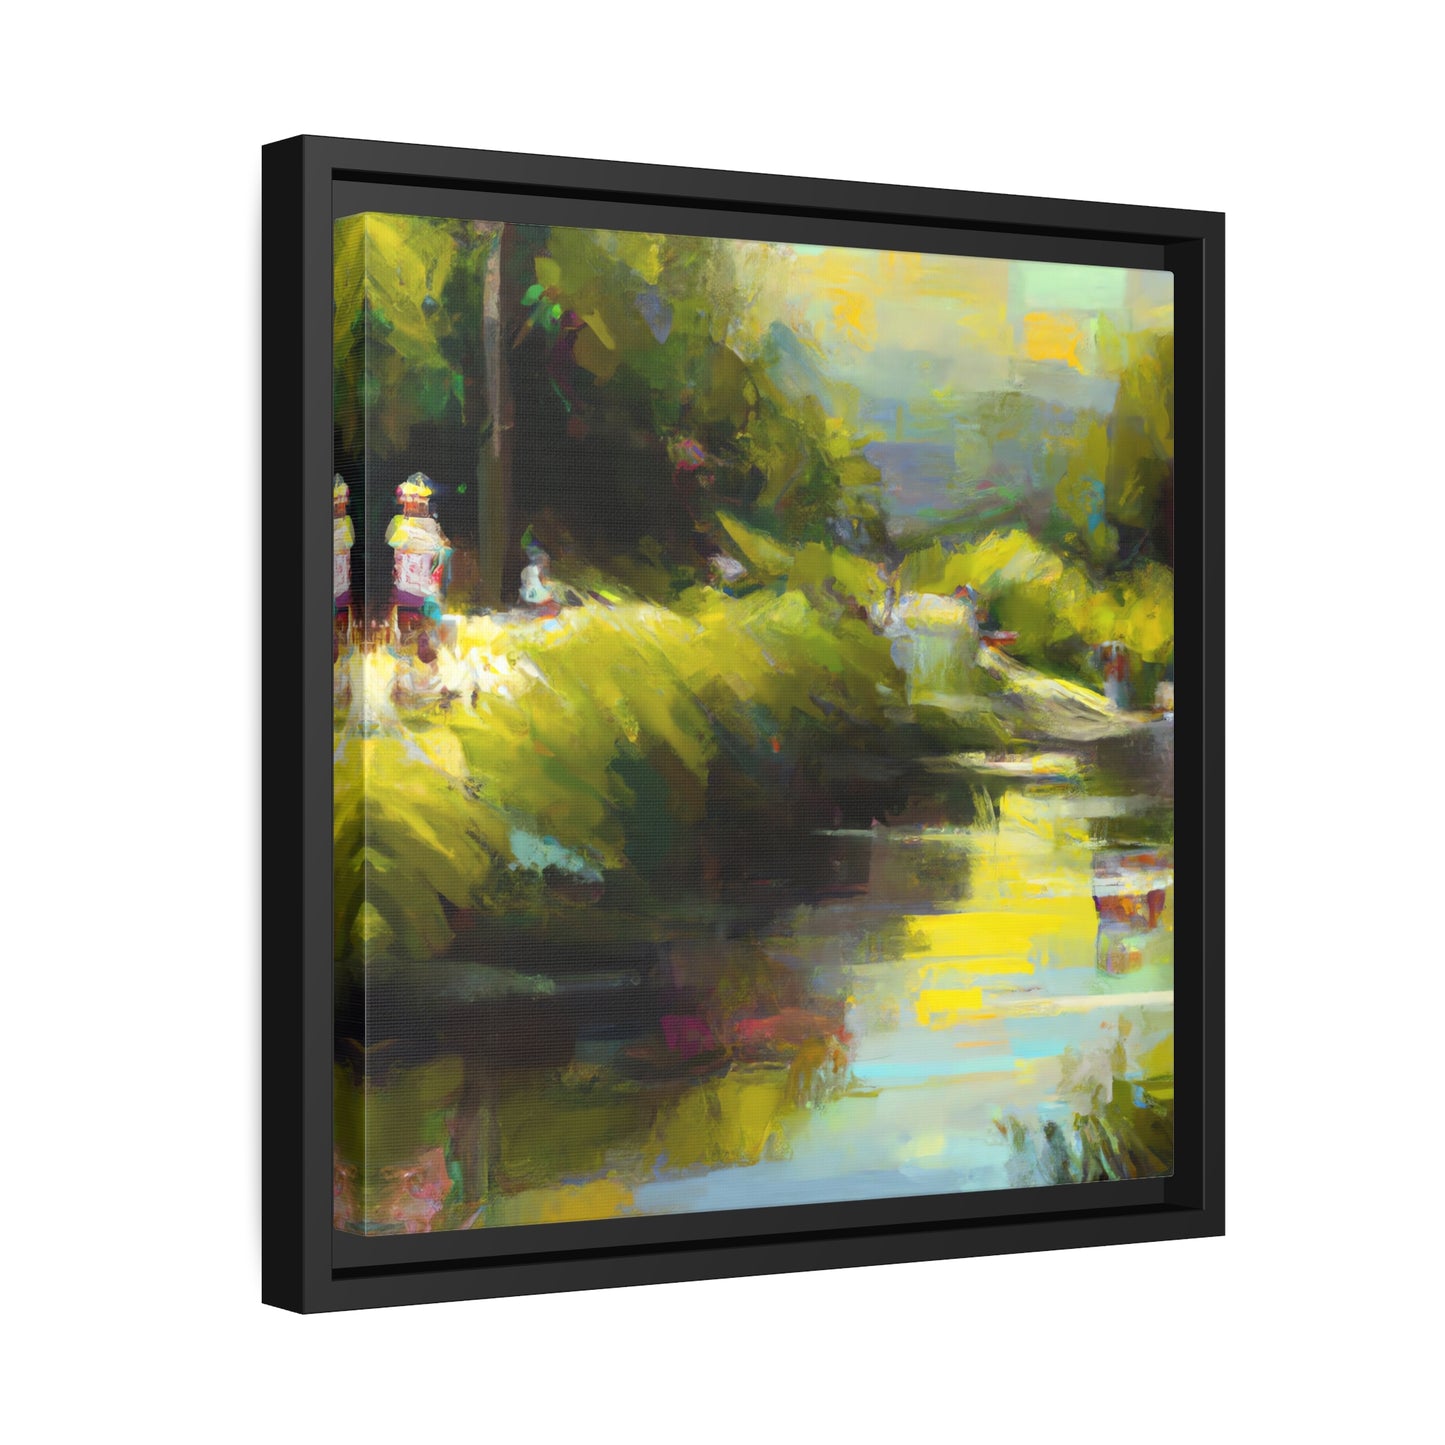 Fredericka Beaumont - Framed Canvas